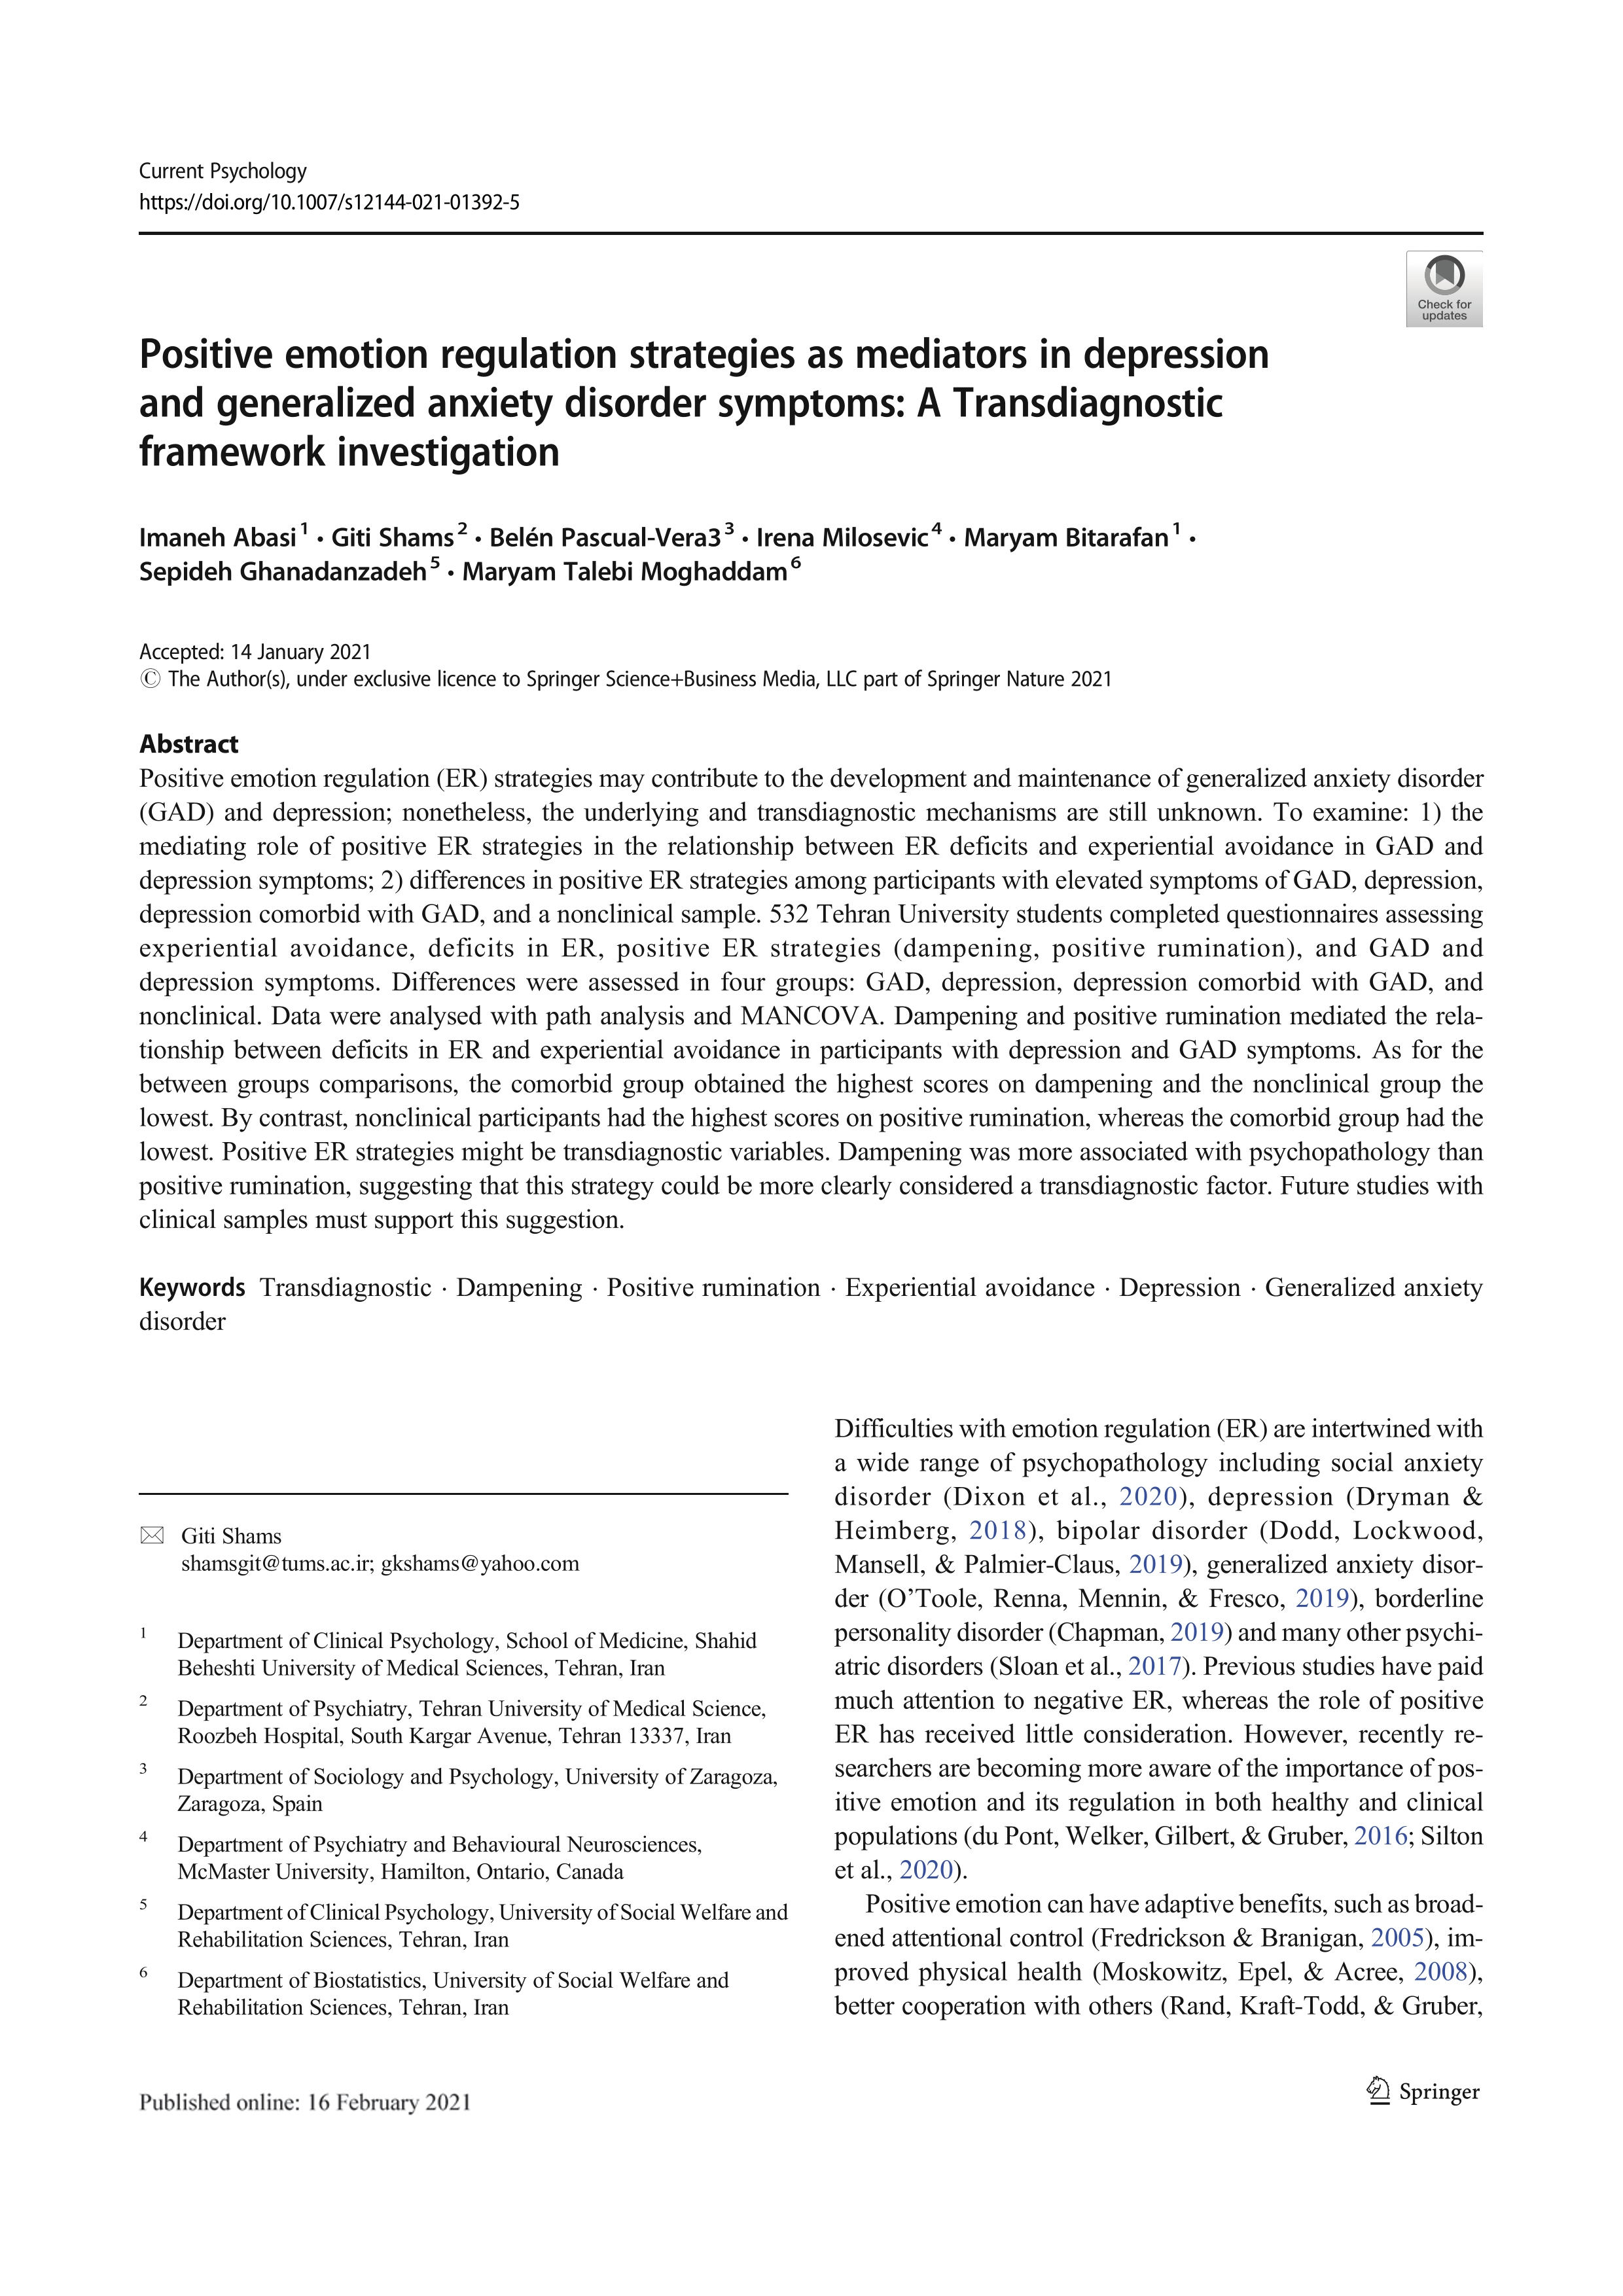 Positive emotion regulation strategies as mediators in depression and generalized anxiety disorder symptoms: A Transdiagnostic framework investigation